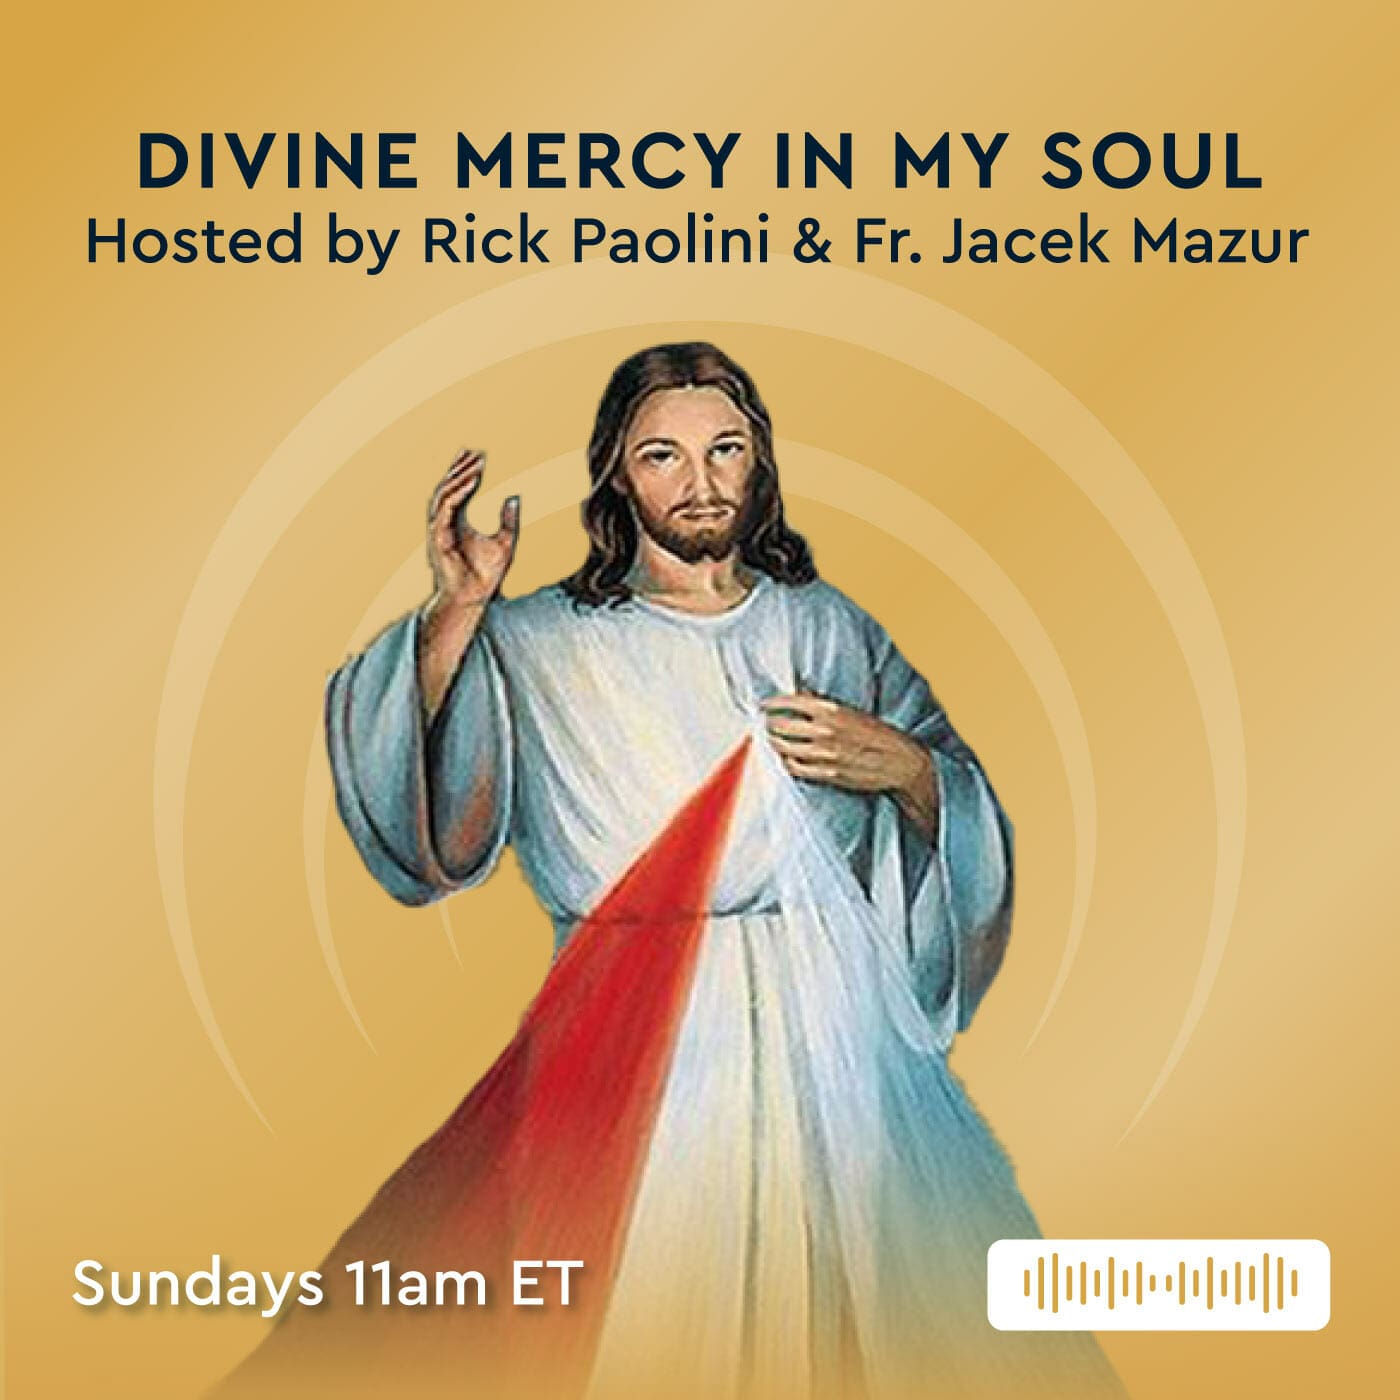 An image of Jesus portraying the Divine Mercy Message